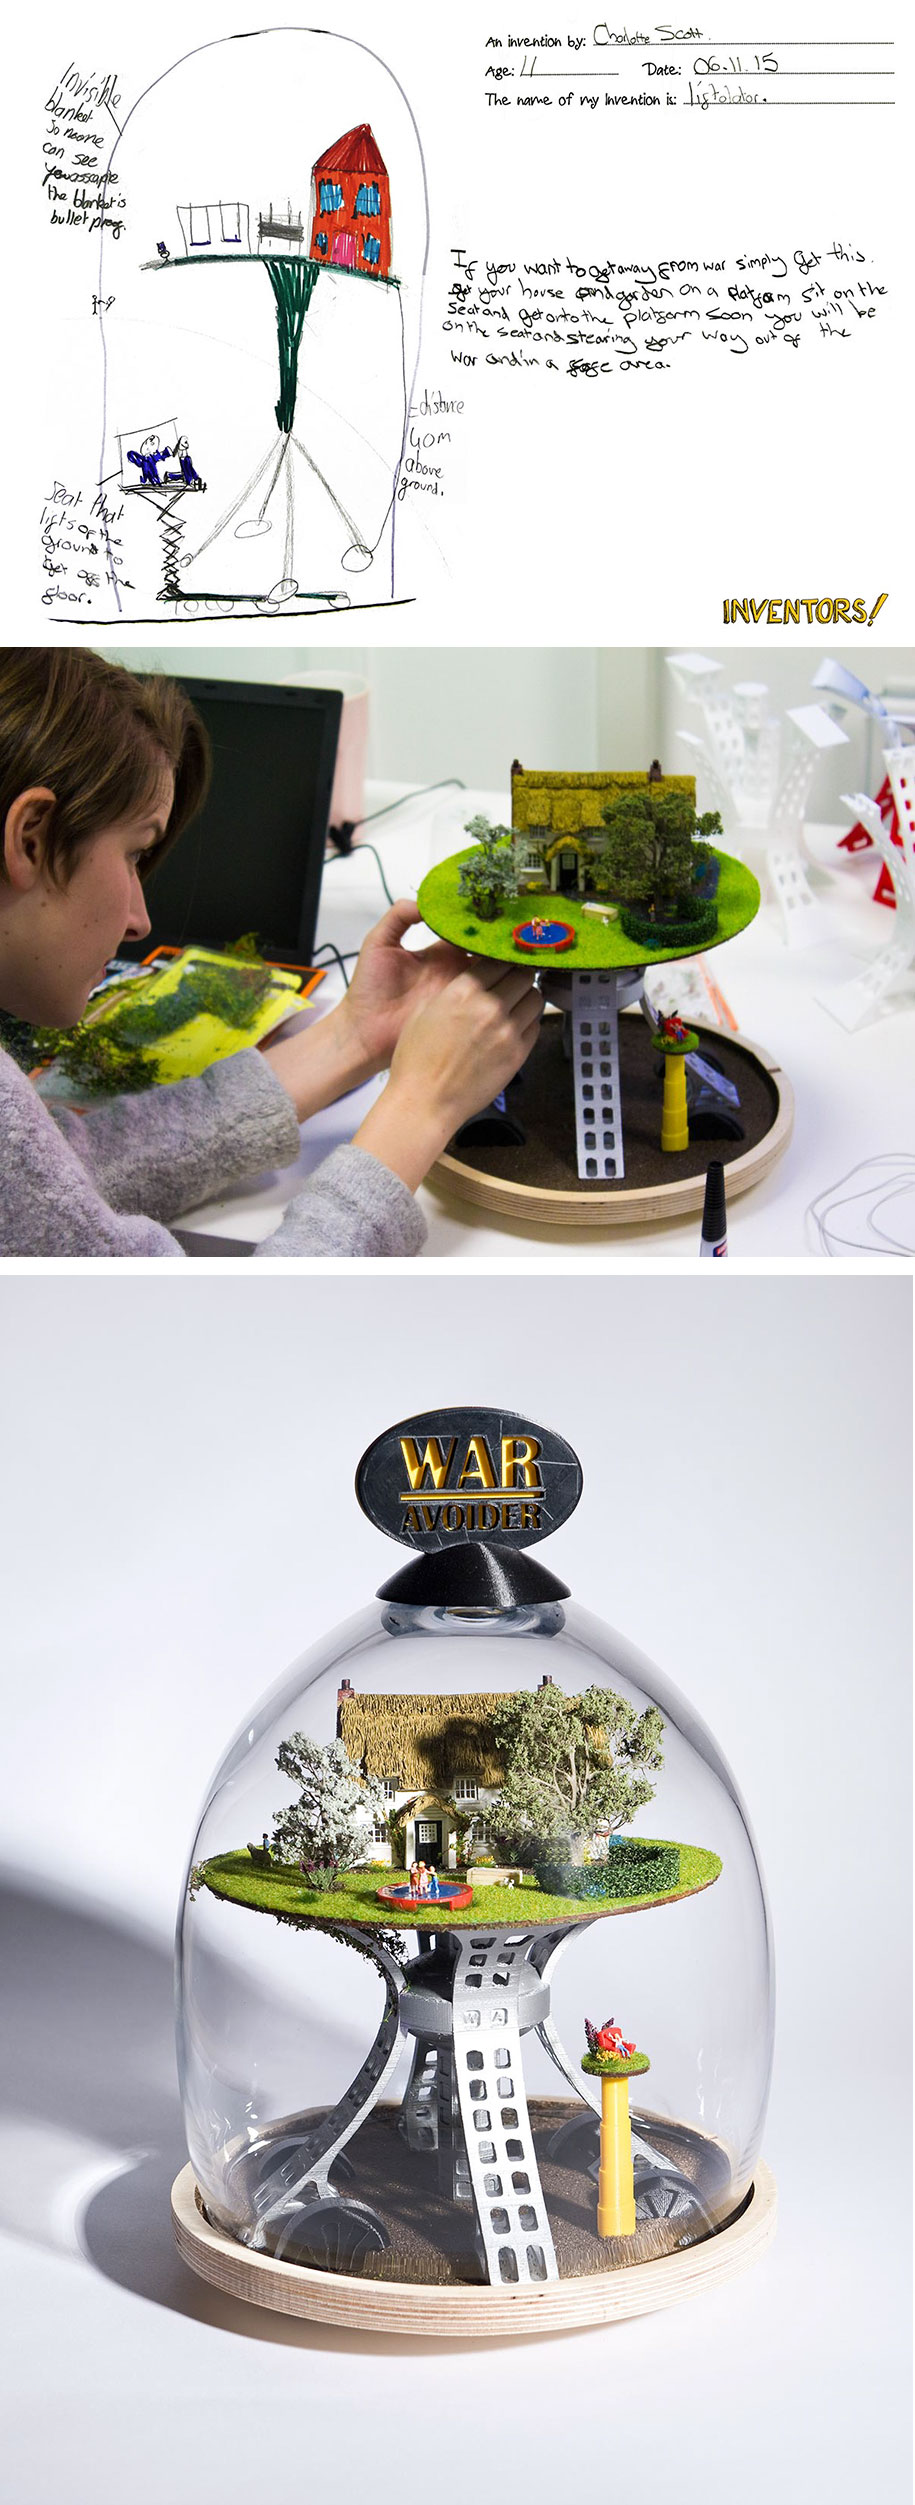 kids-inventions-real-products-inventors-project-dominic-wilcox-10